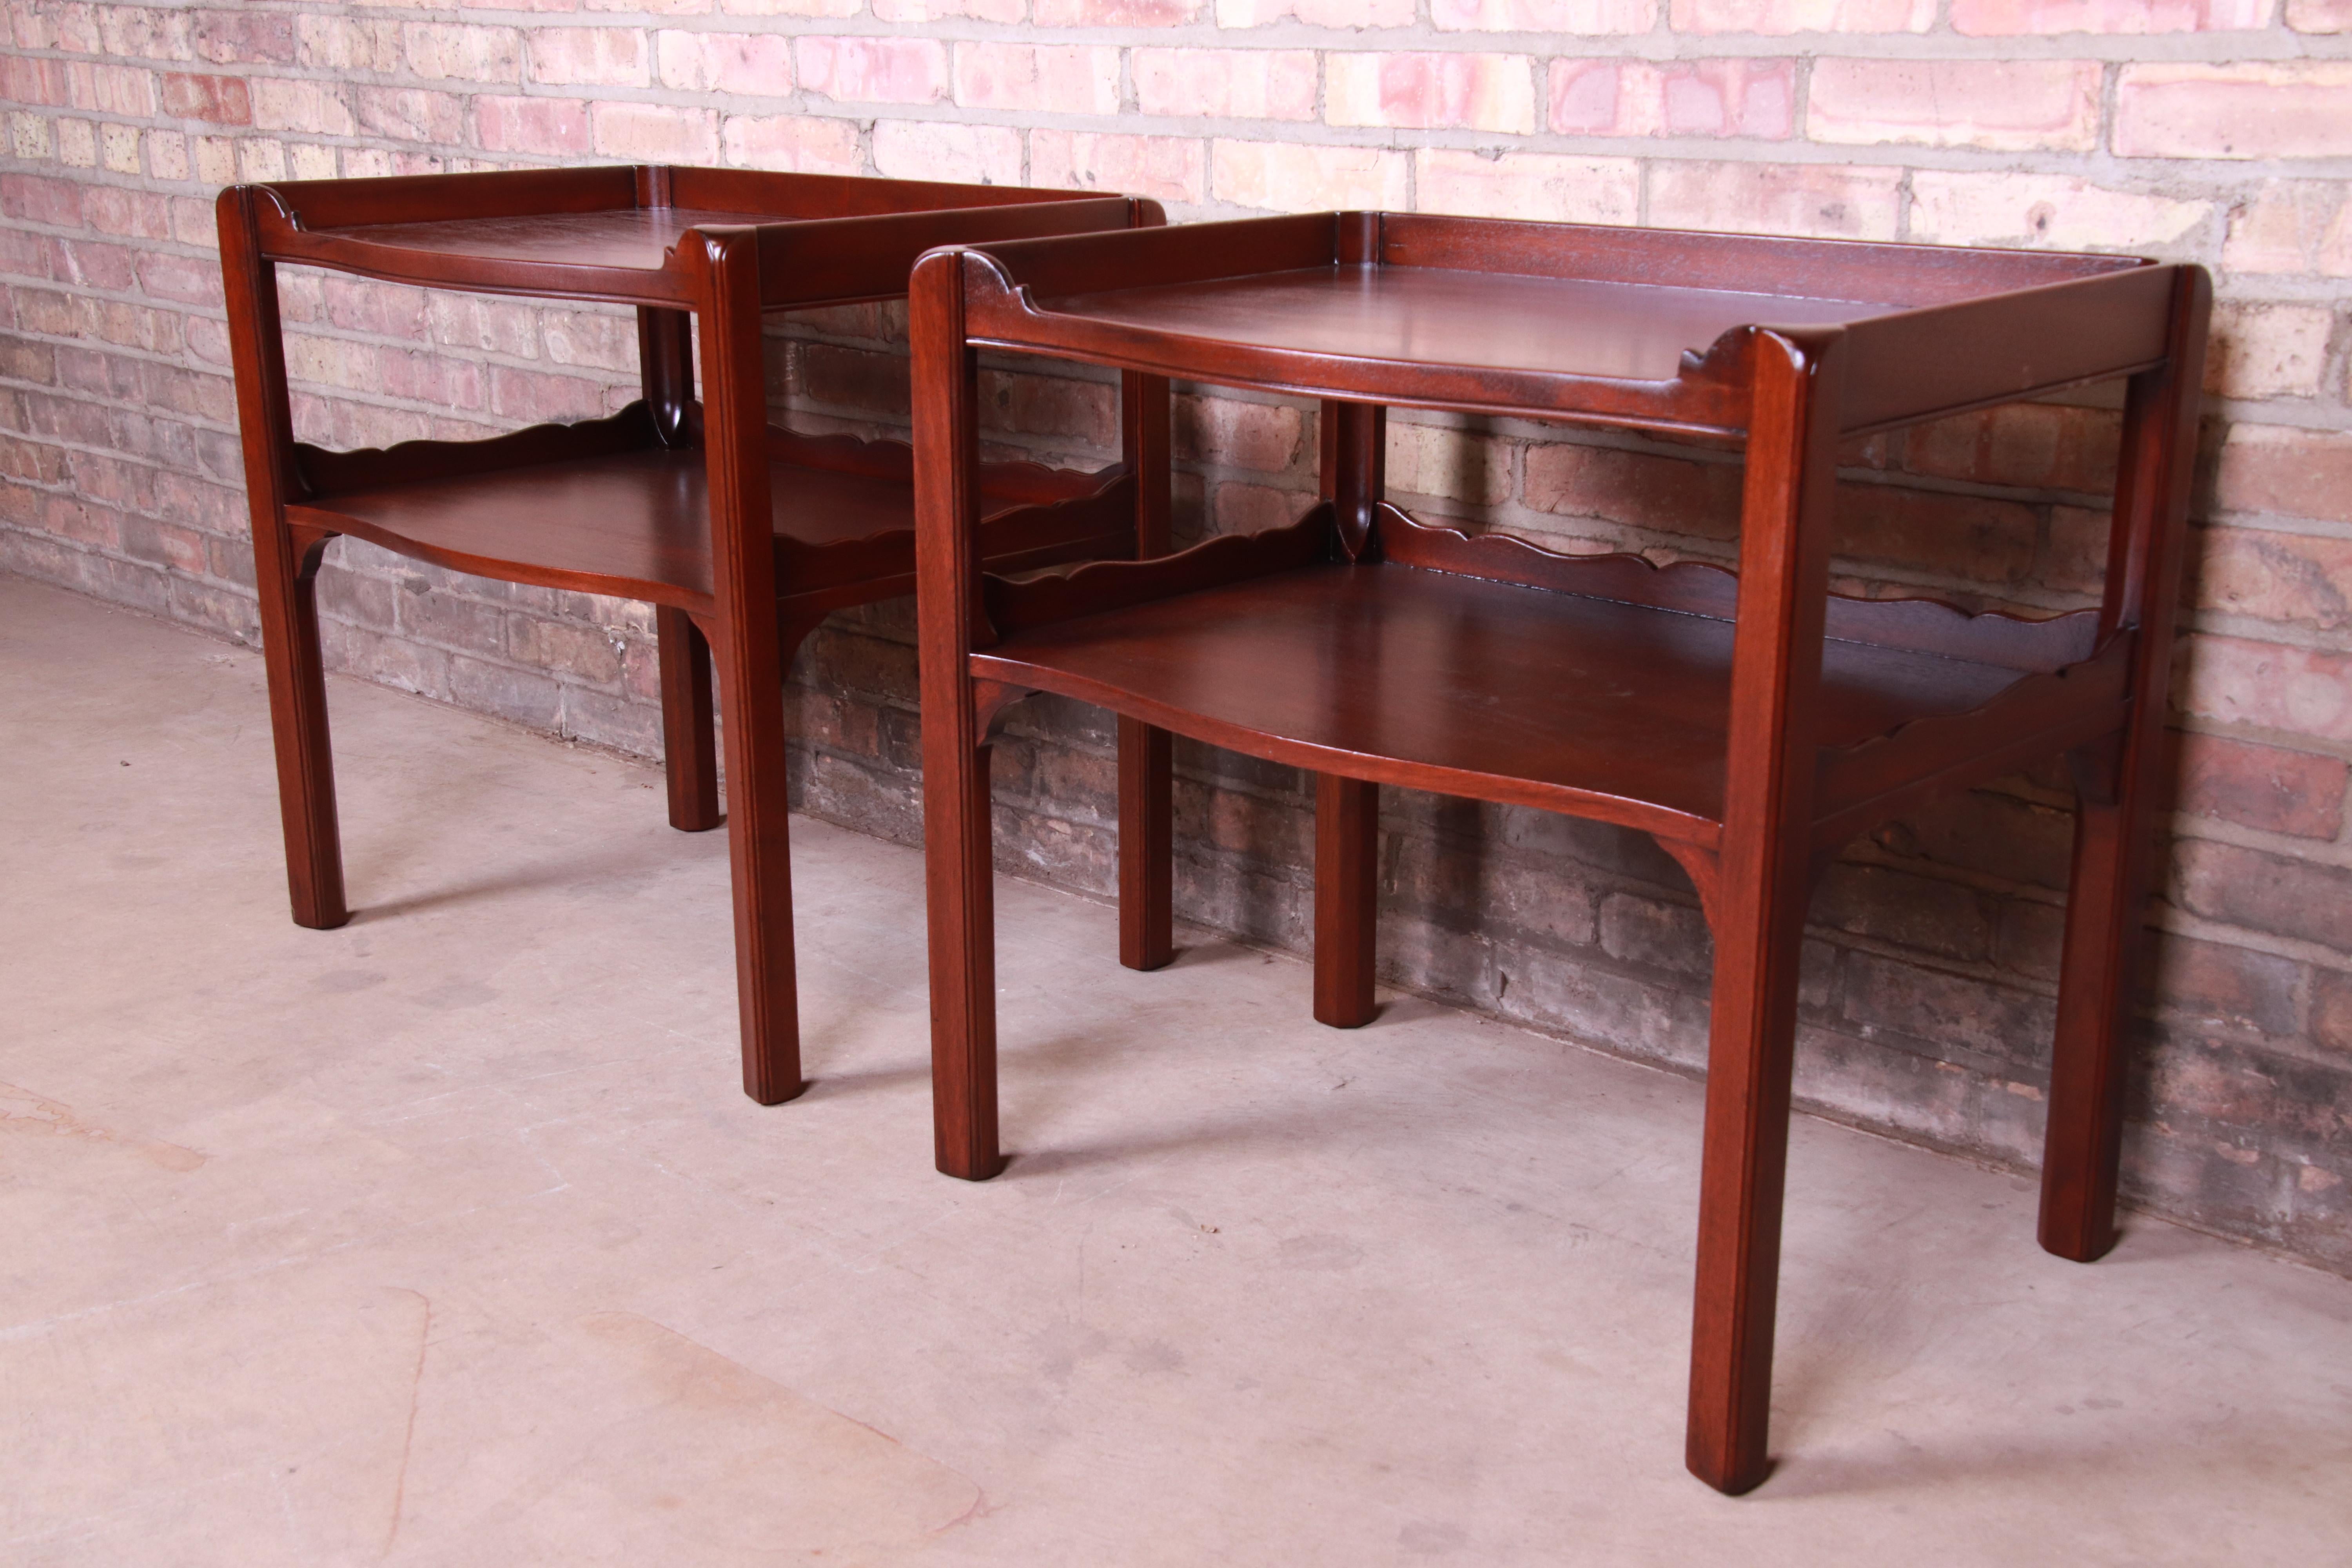 20th Century Baker Furniture Georgian Mahogany Two-Tier Nightstands or End Tables, Restored